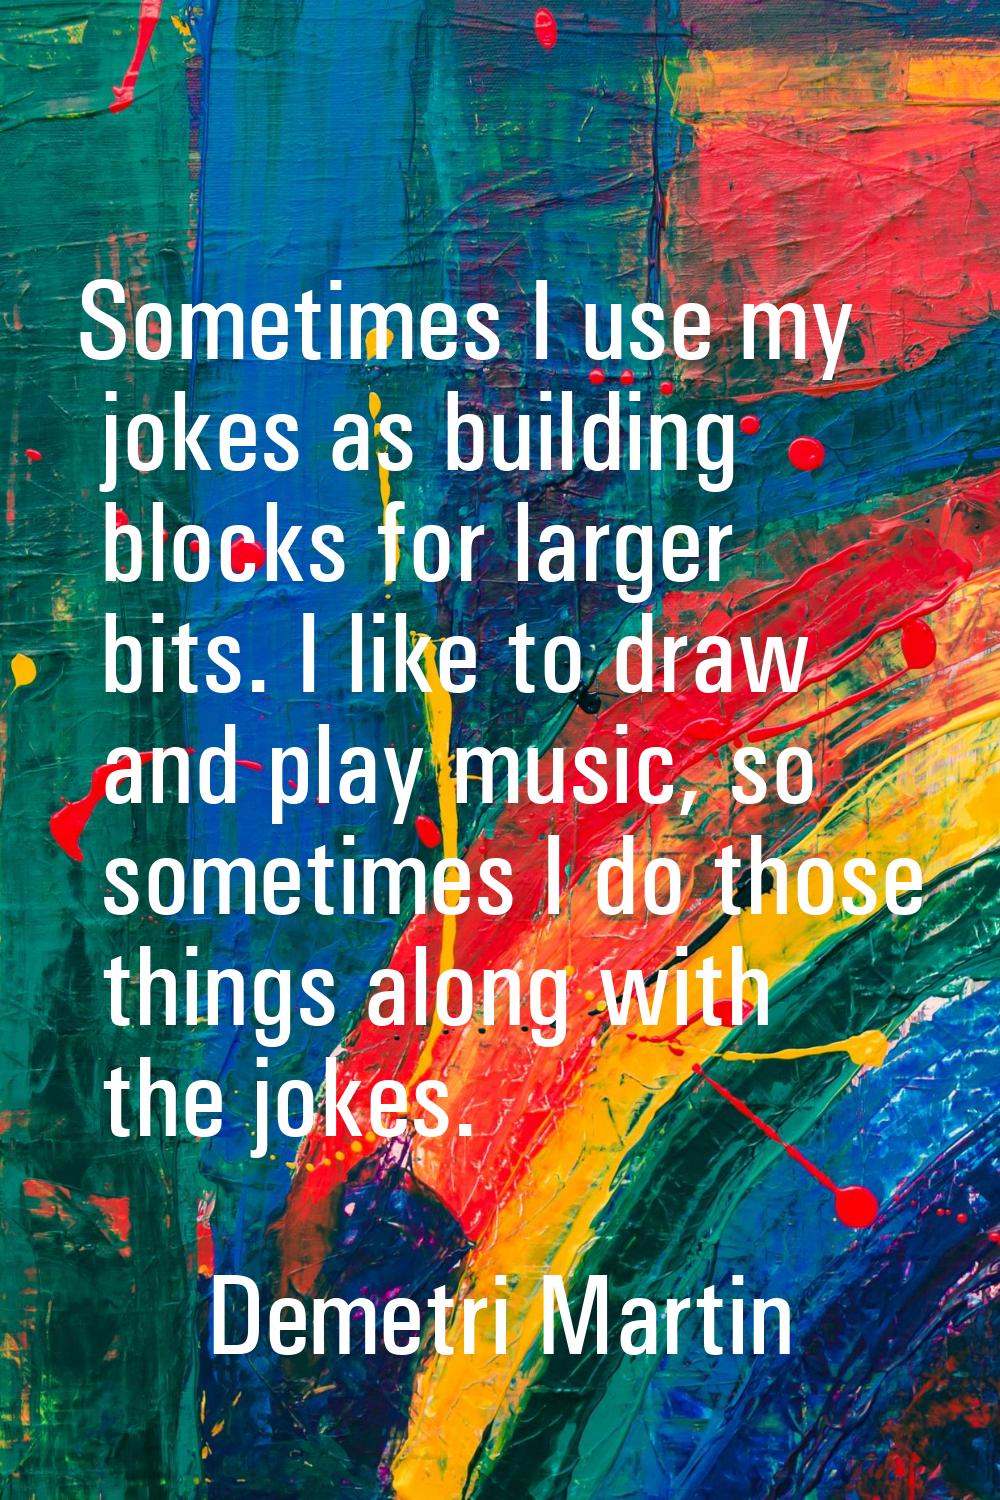 Sometimes I use my jokes as building blocks for larger bits. I like to draw and play music, so some